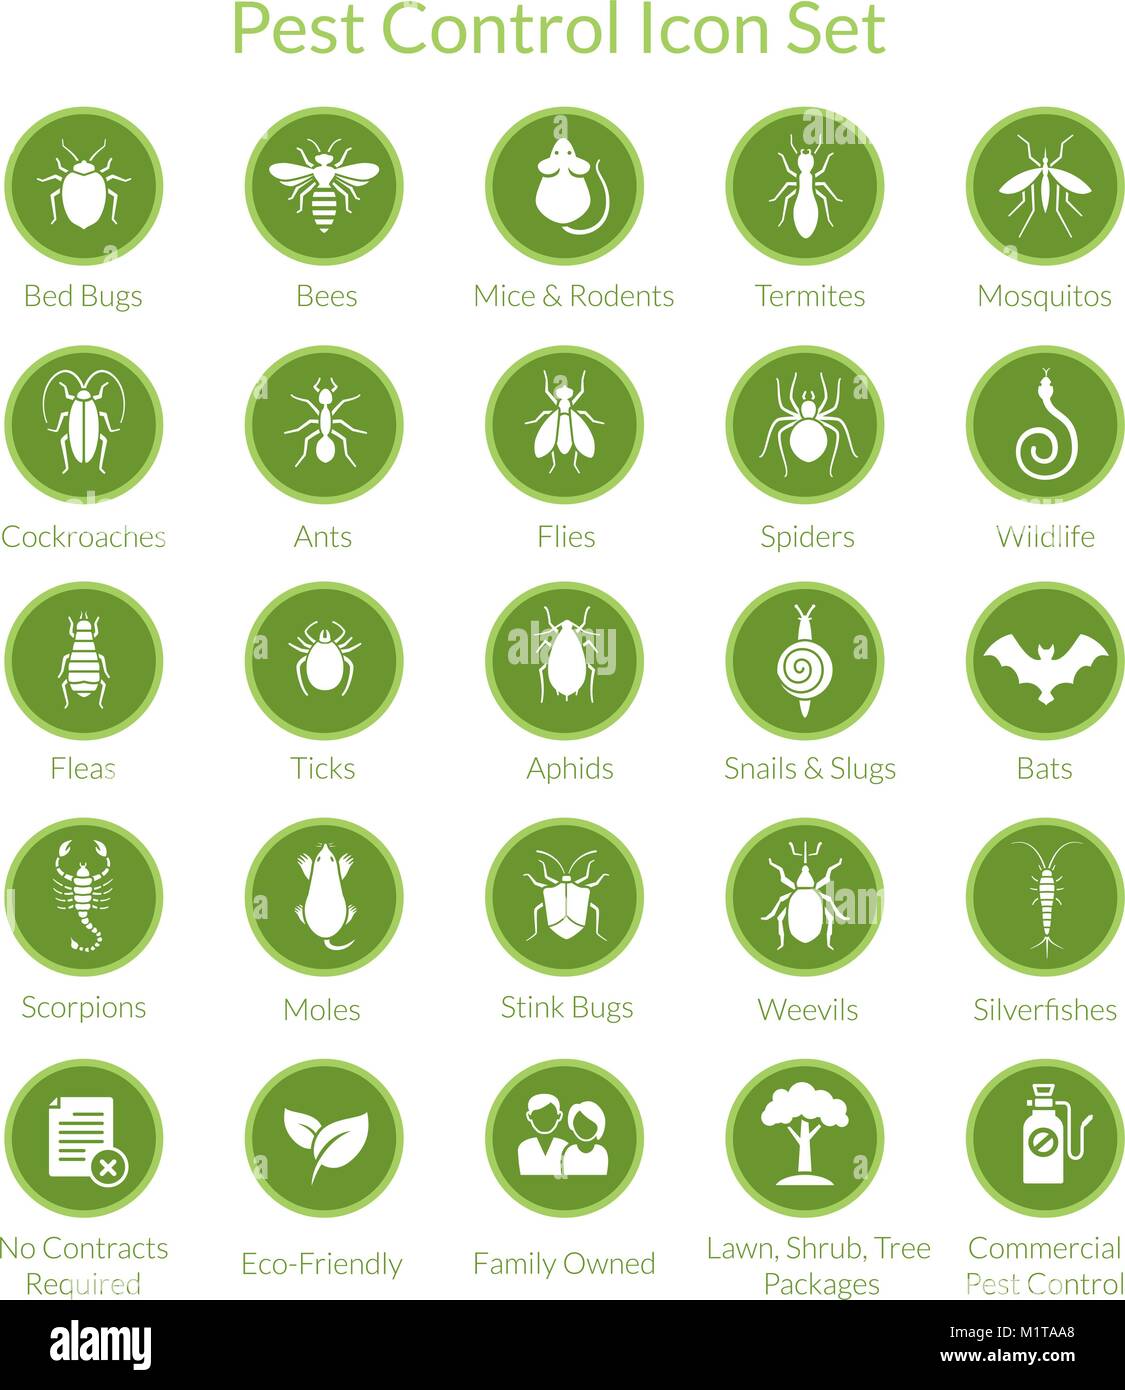 Vector icon set with insects like flies, cockroaches, bed bugs, weevils, ticks, spiders and termites for pest control companies on the green circle Stock Vector